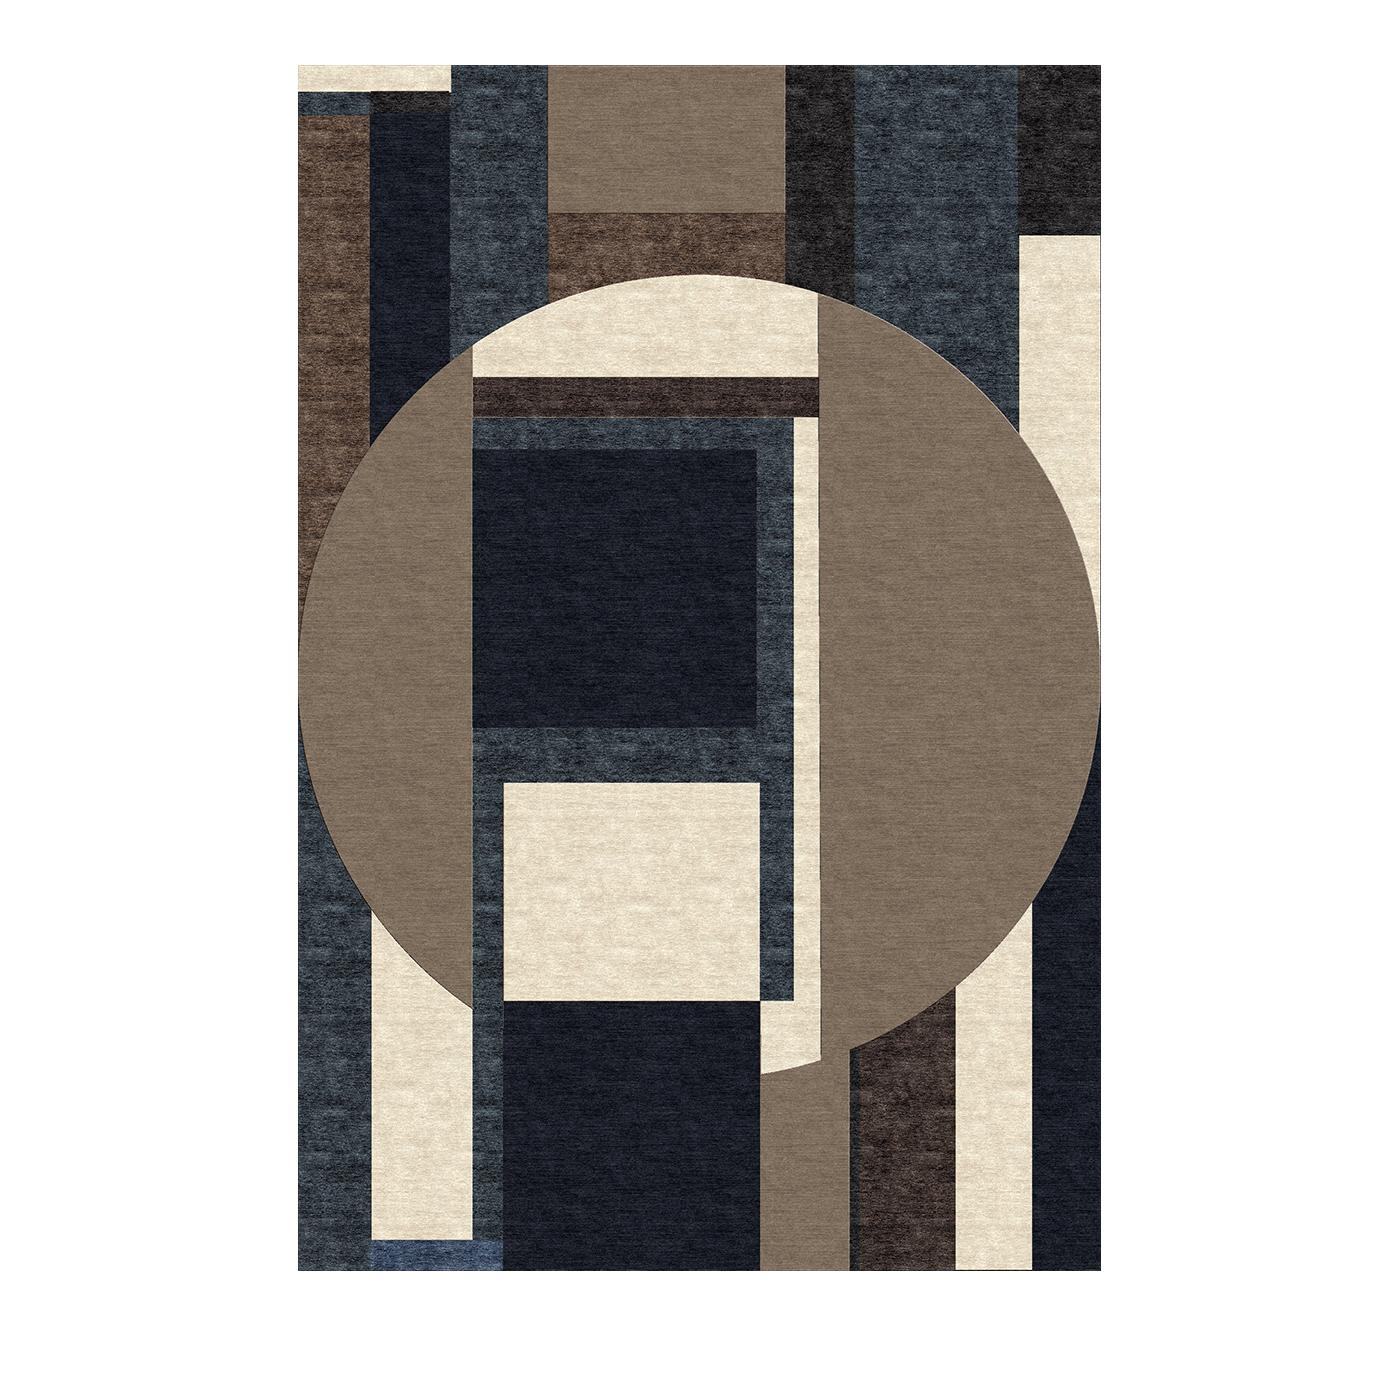 Reminiscent of modern abstract art, this rug is a captivating dance of color and form. A demure color palette of gray, beige, black, brown, and dark blue is masterfully woven with high-quality wool and bamboo fibers using Tibetan hand-knotting